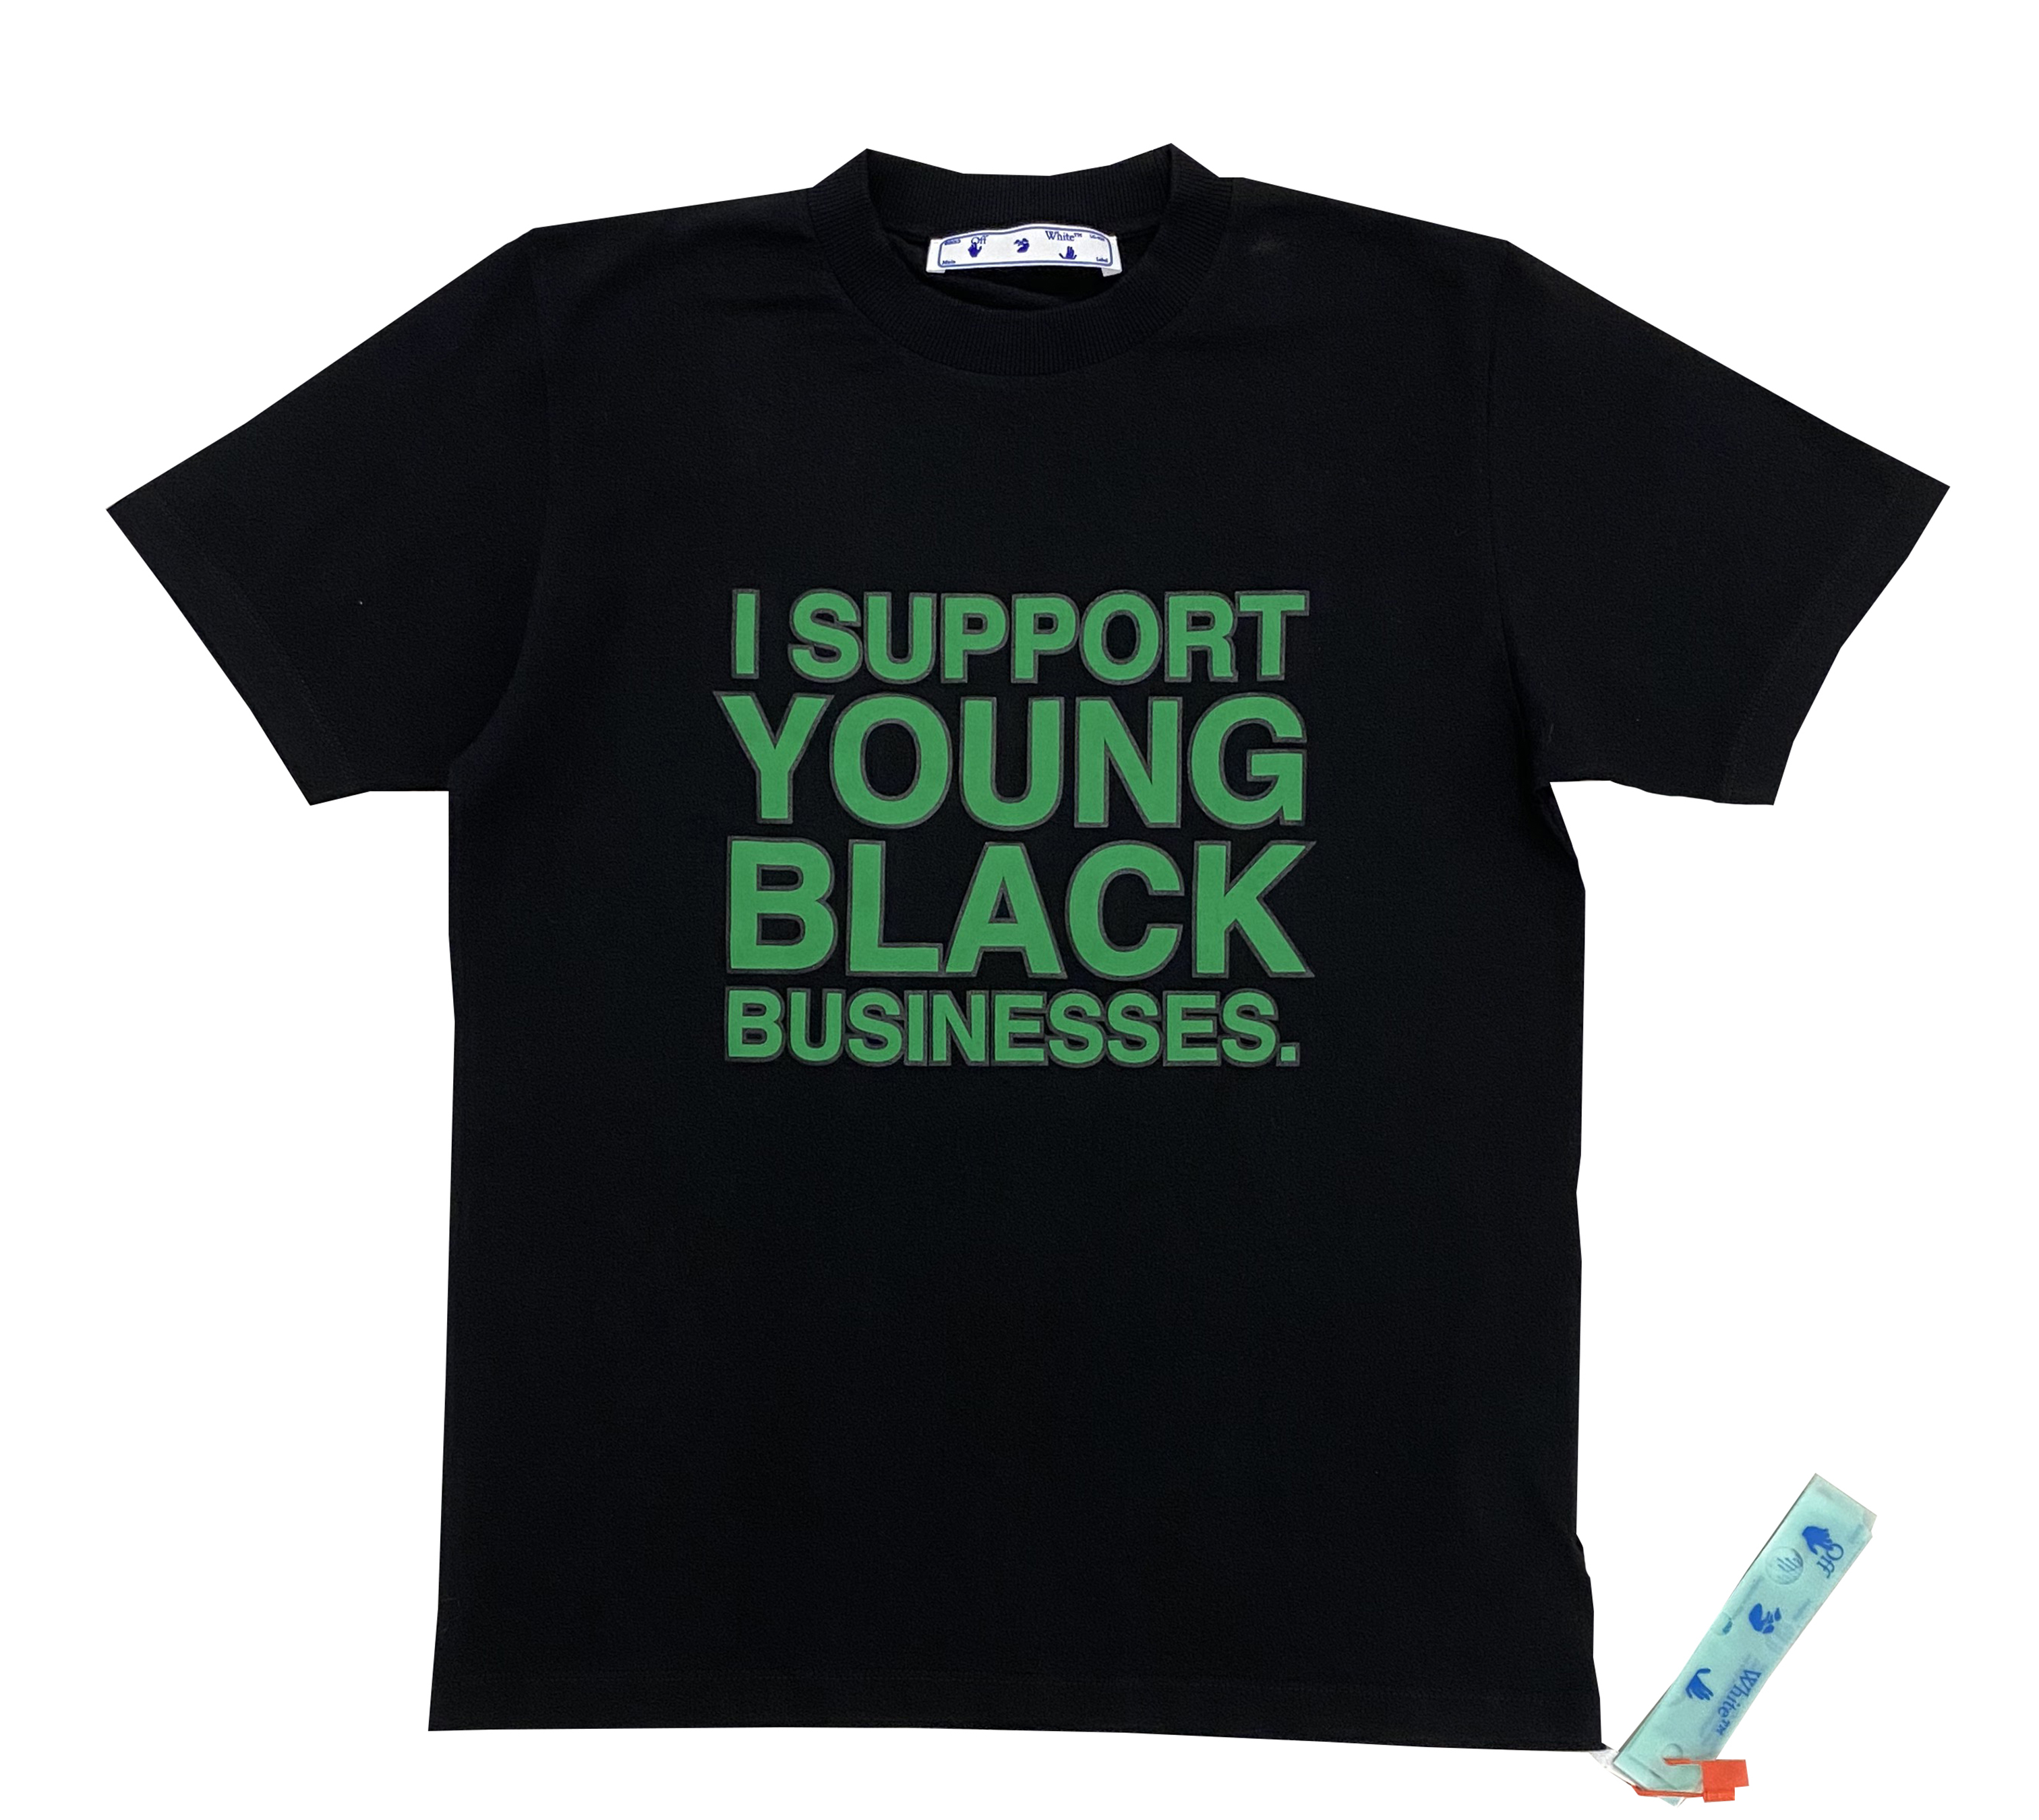 Off-White's Virgil Abloh & Stüssy Team Up For I Support Young Black  Businesses Initiative Phase 2